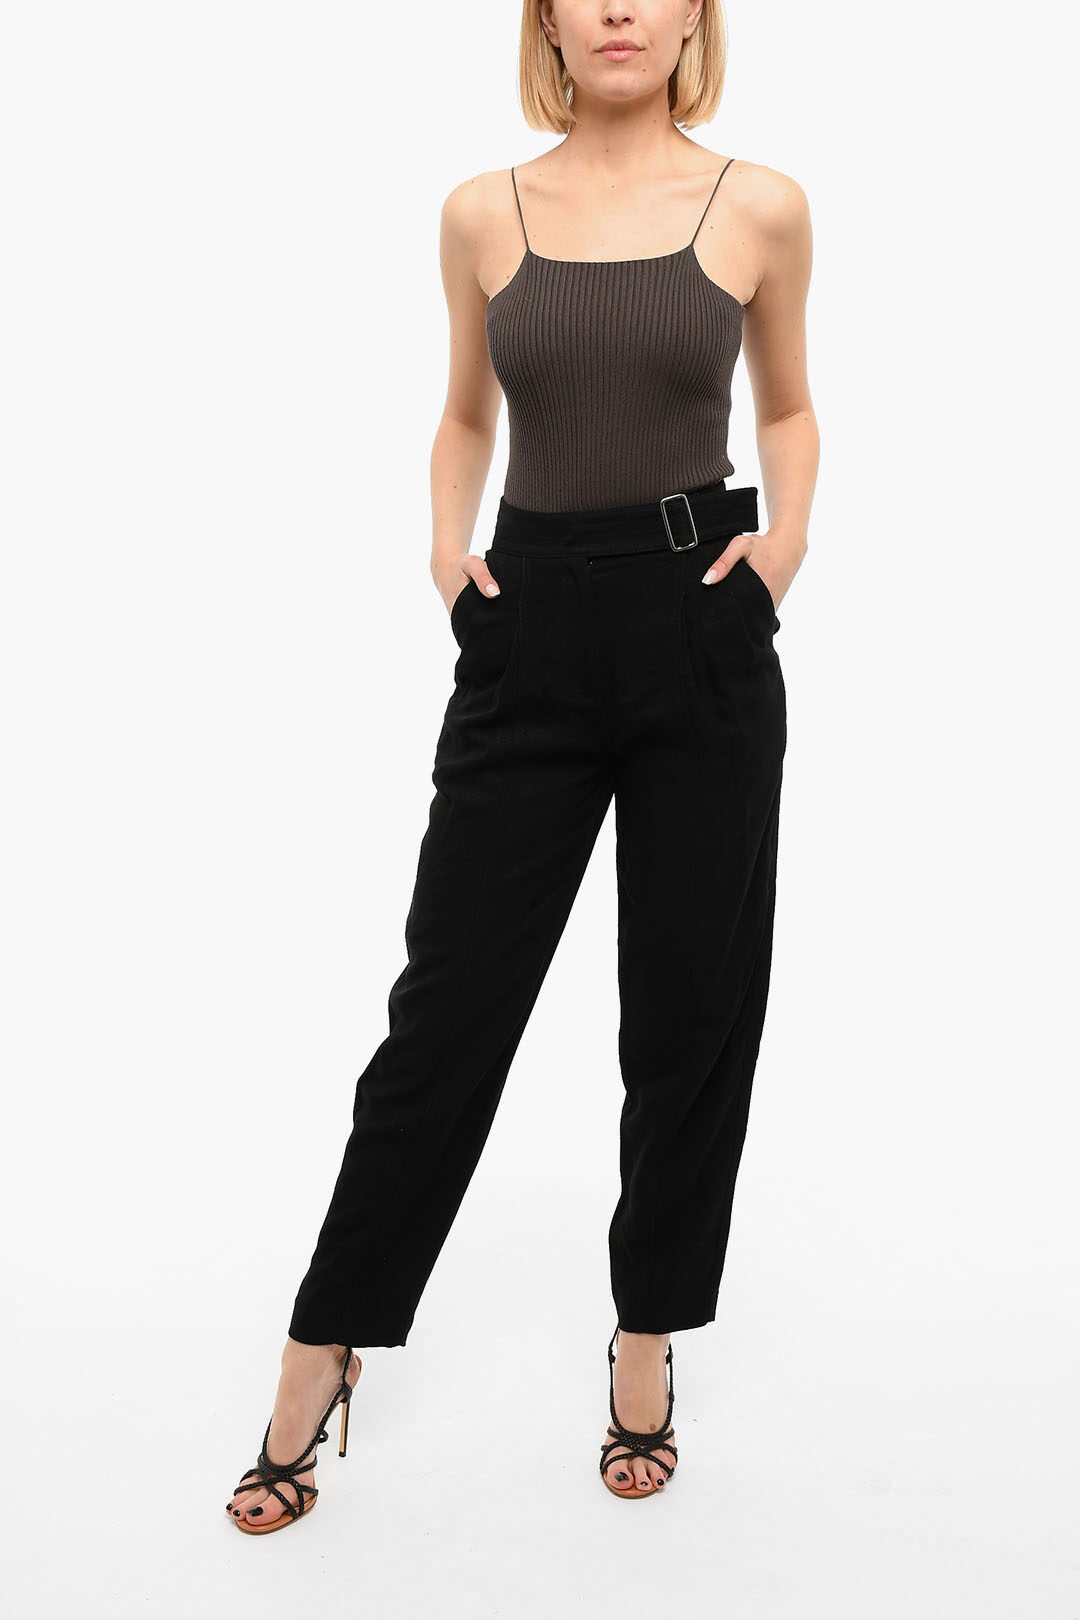 Iro Double Pleated HIgh waisted pants women - Glamood Outlet